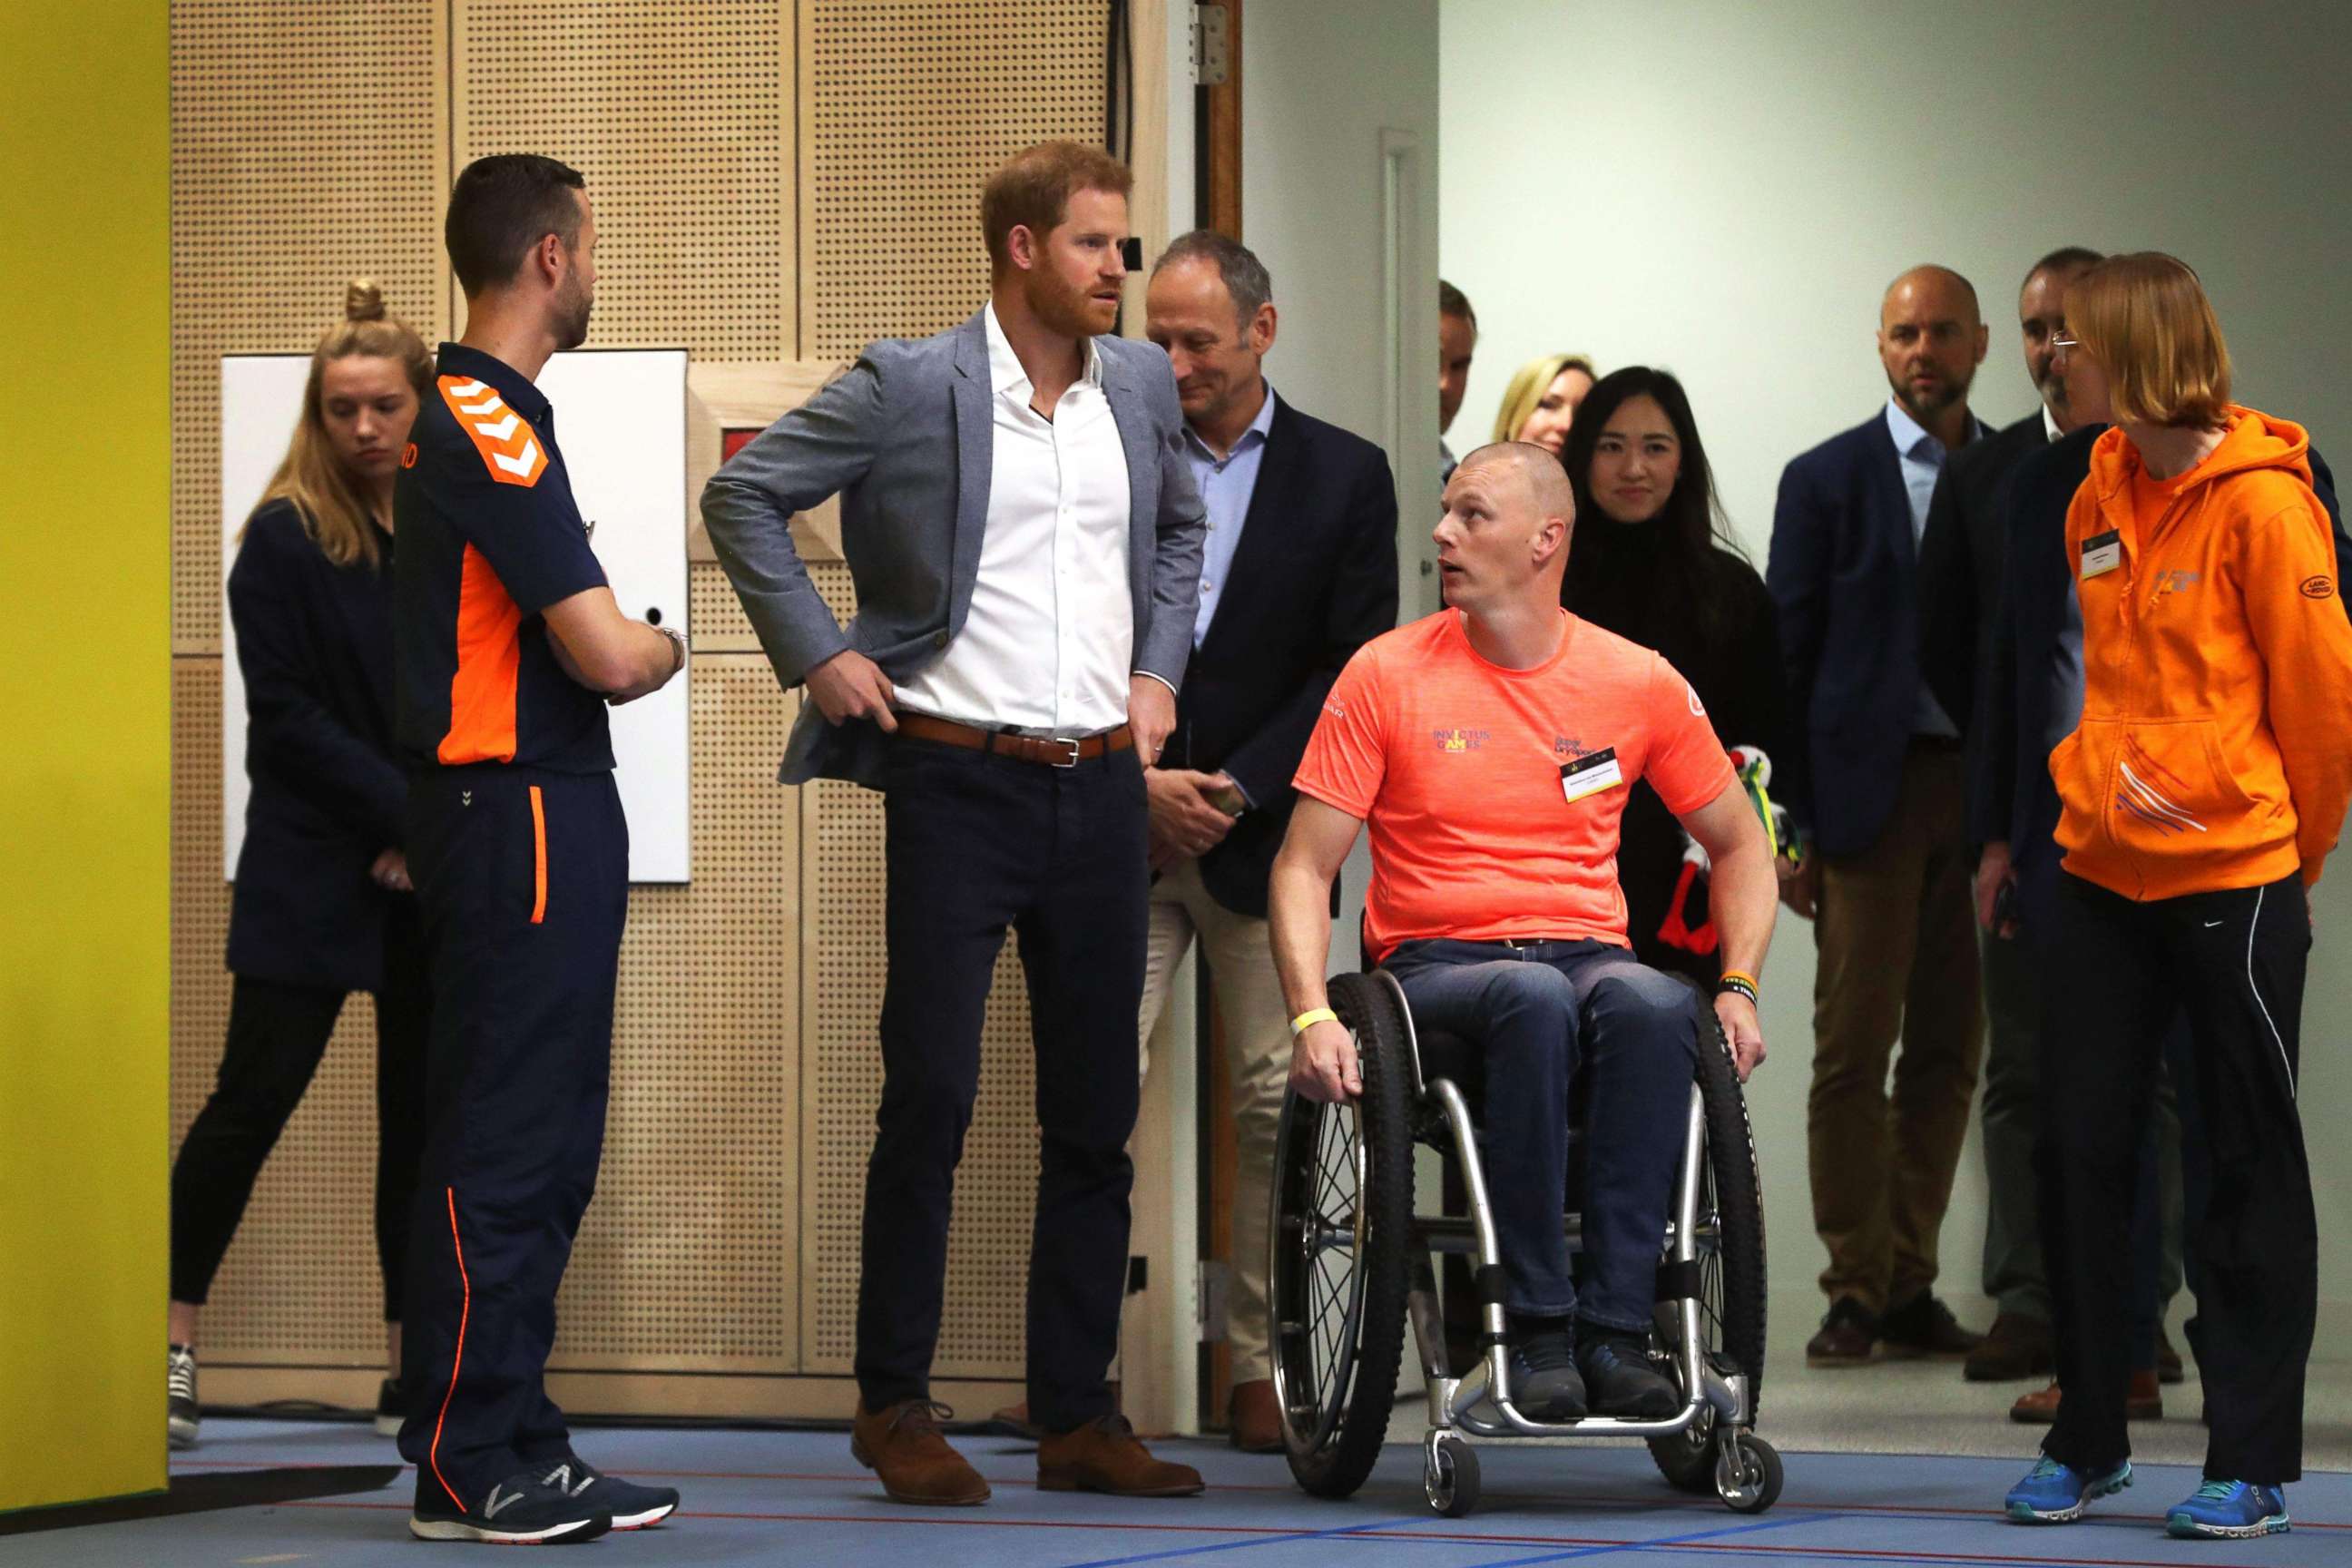 PHOTO: Britain's Prince Harry speaks with officials as he watches a basketball game in The Hague, May 9, 2019, ahead of The Invictus Games The Hague 2020.